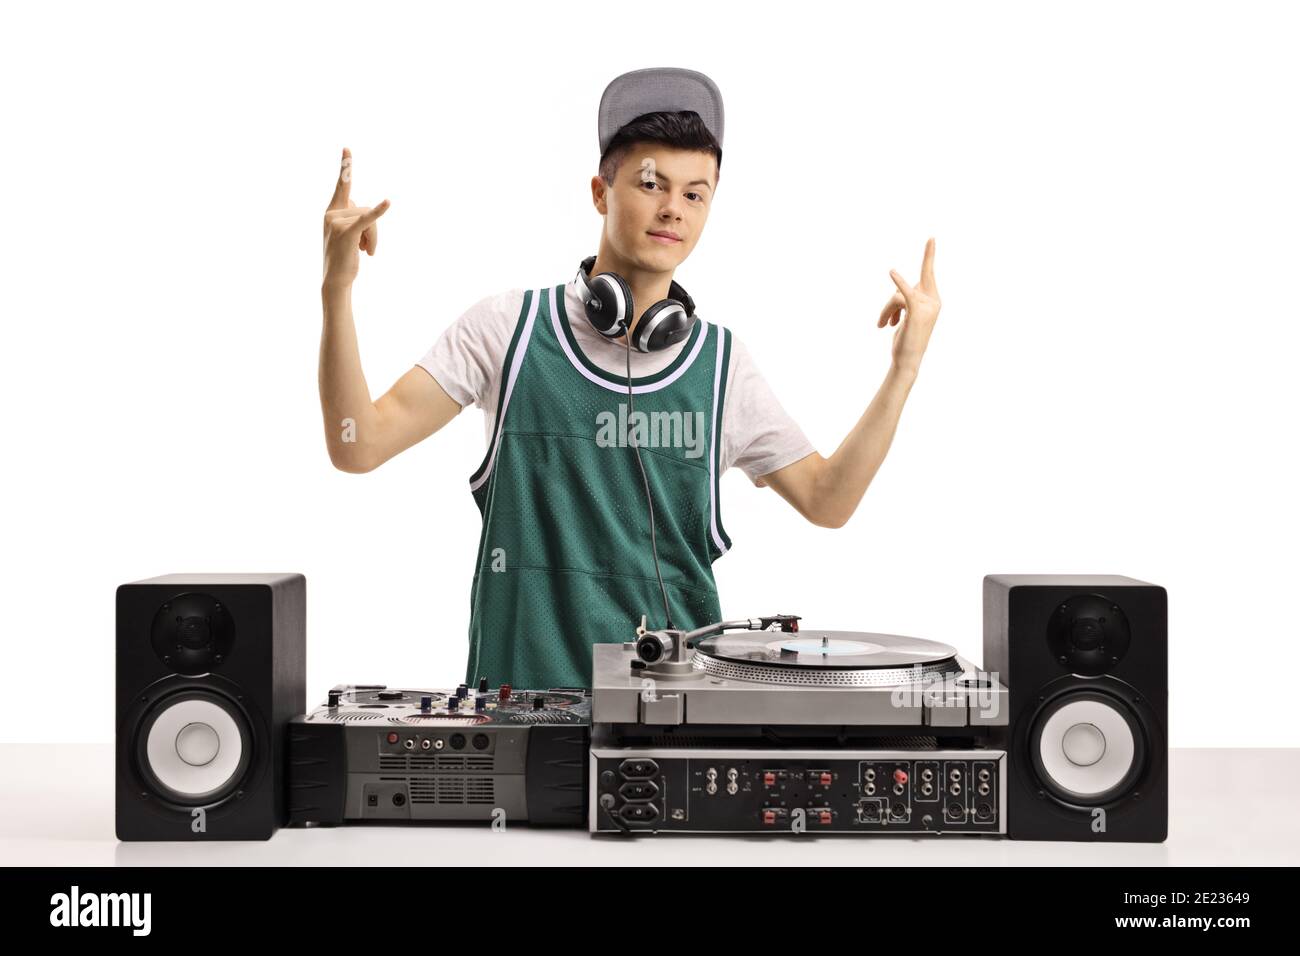 Young male dj with vinyl turntable gesturing a sign isolated on white background Stock Photo